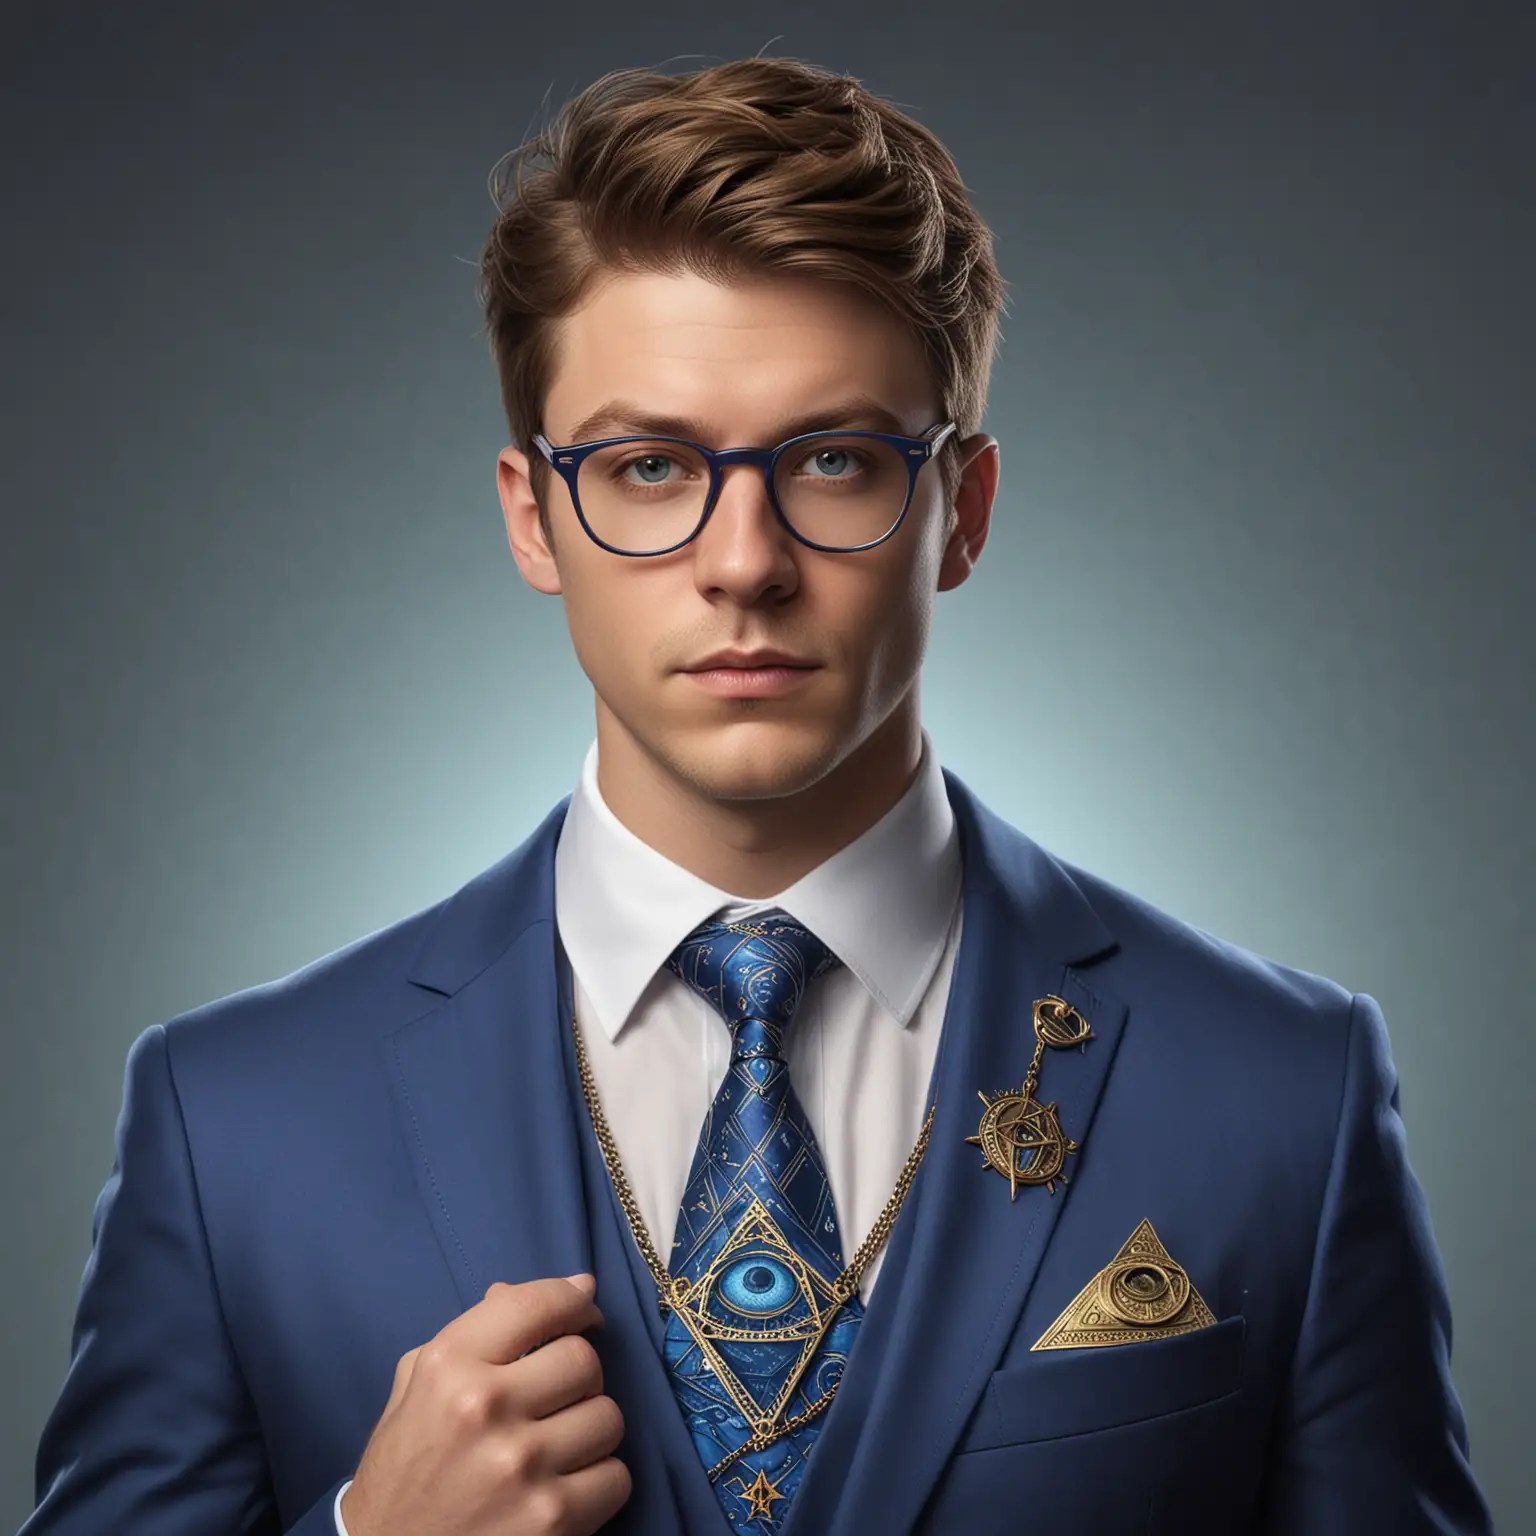 Geeky White Male in Blue Suit with Illuminati Necklace and Glasses